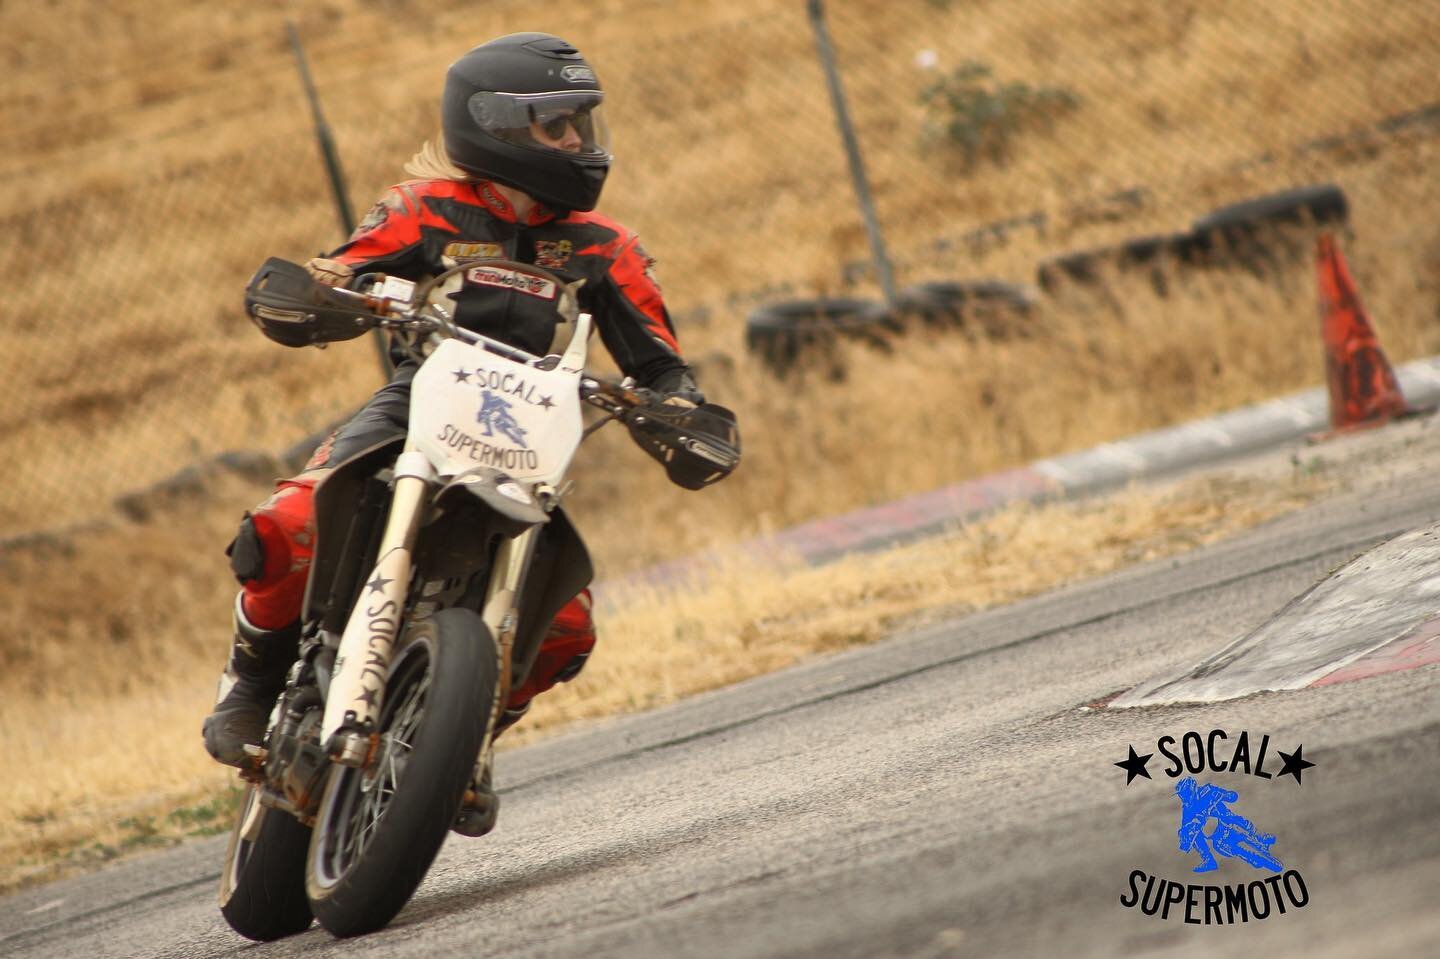 What&rsquo;s the best motorcycle class that you&rsquo;ve taken? One of our favorites is @socalsupermoto 🤩💙
&bull;
&bull;
&bull;
#supermoto #socalsupermoto #womenwhoride #ridesupermoto